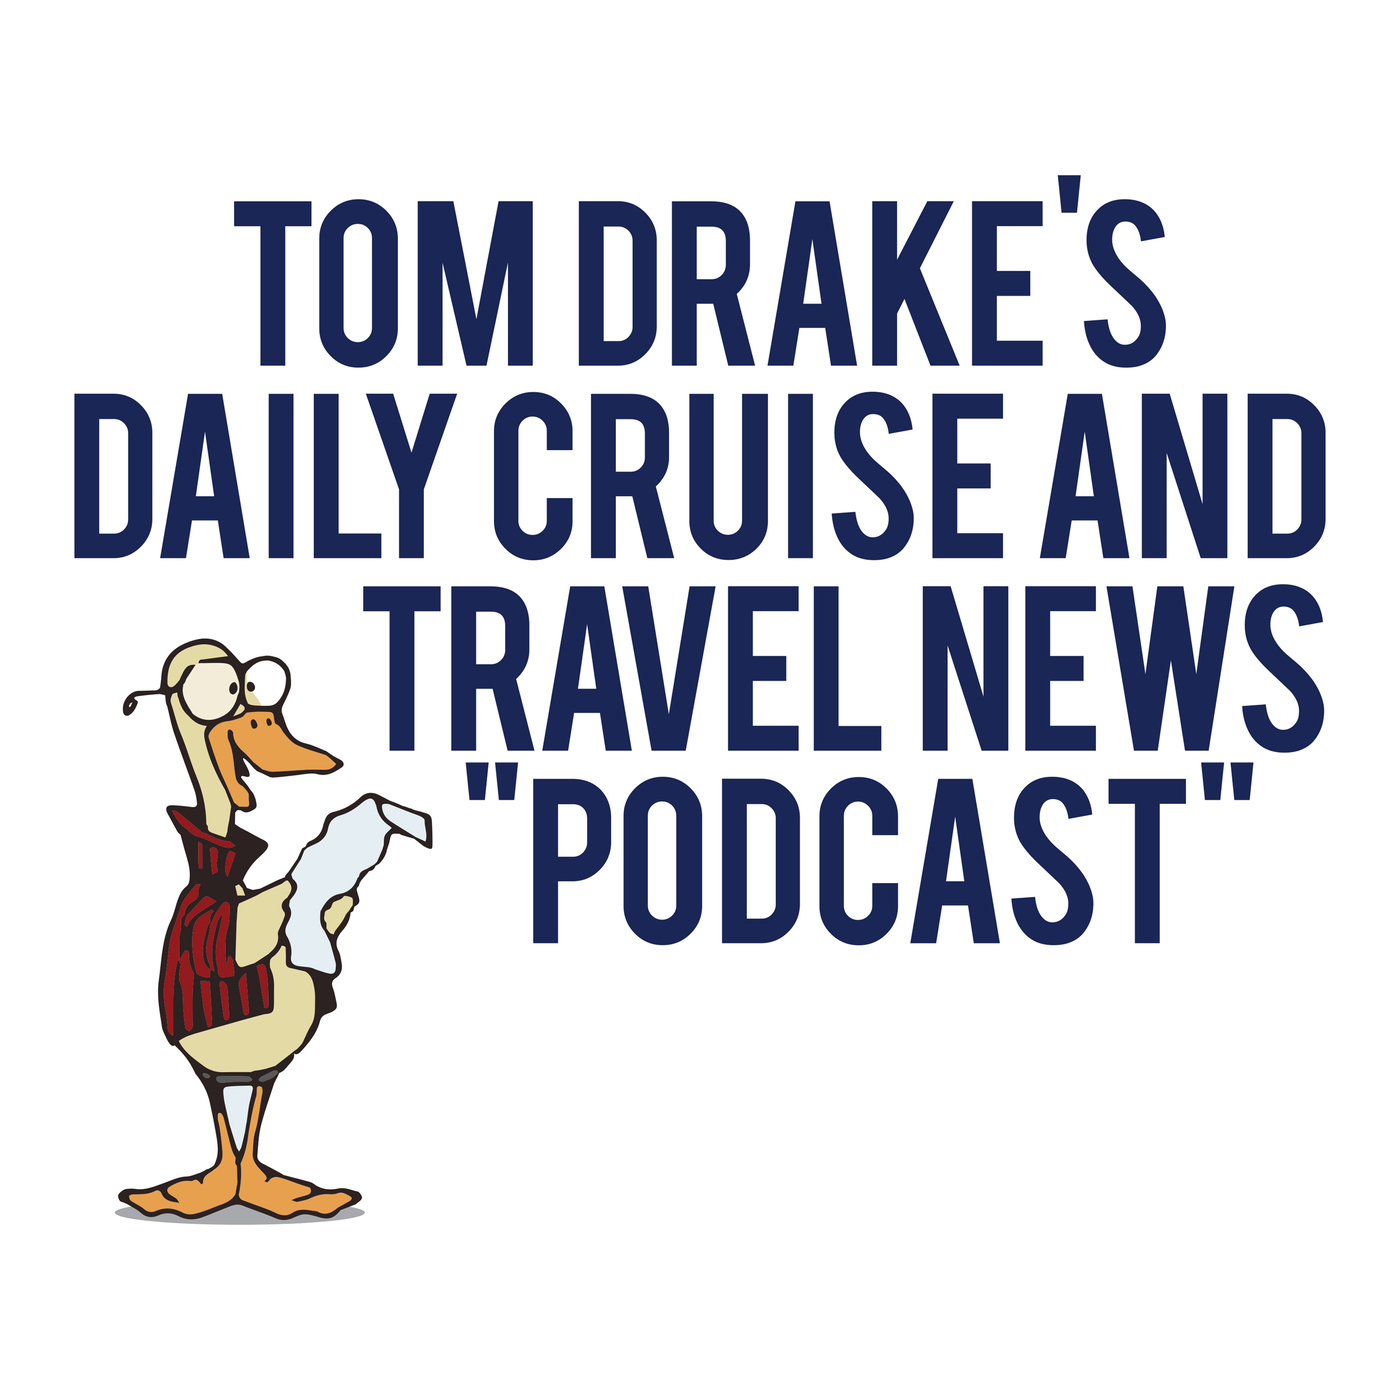 Podcast for January 20th. Do you care if your cruise line is trying to save the planet?